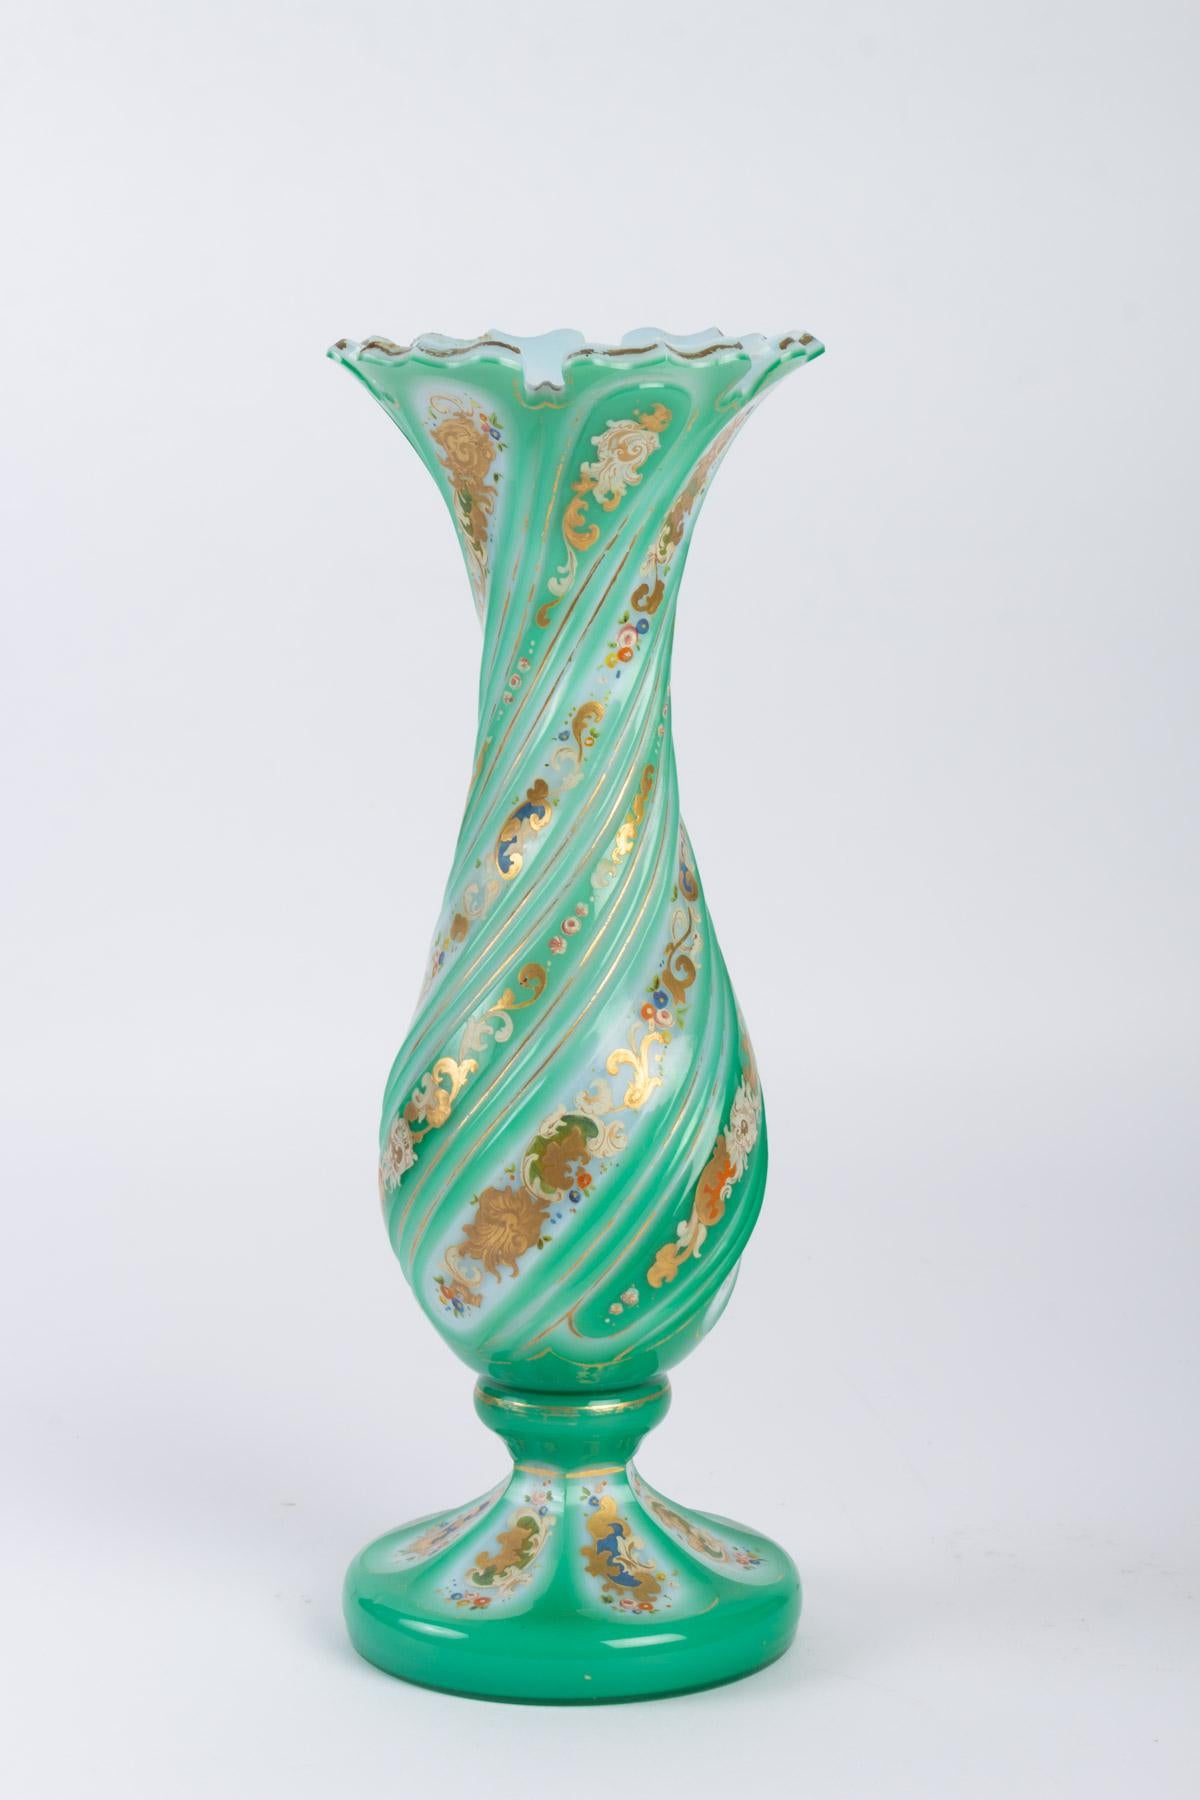 Enameled and gilded opaline vase, 1840-1860, 19th century.

Measures: H 32 cm, D 12 cm.